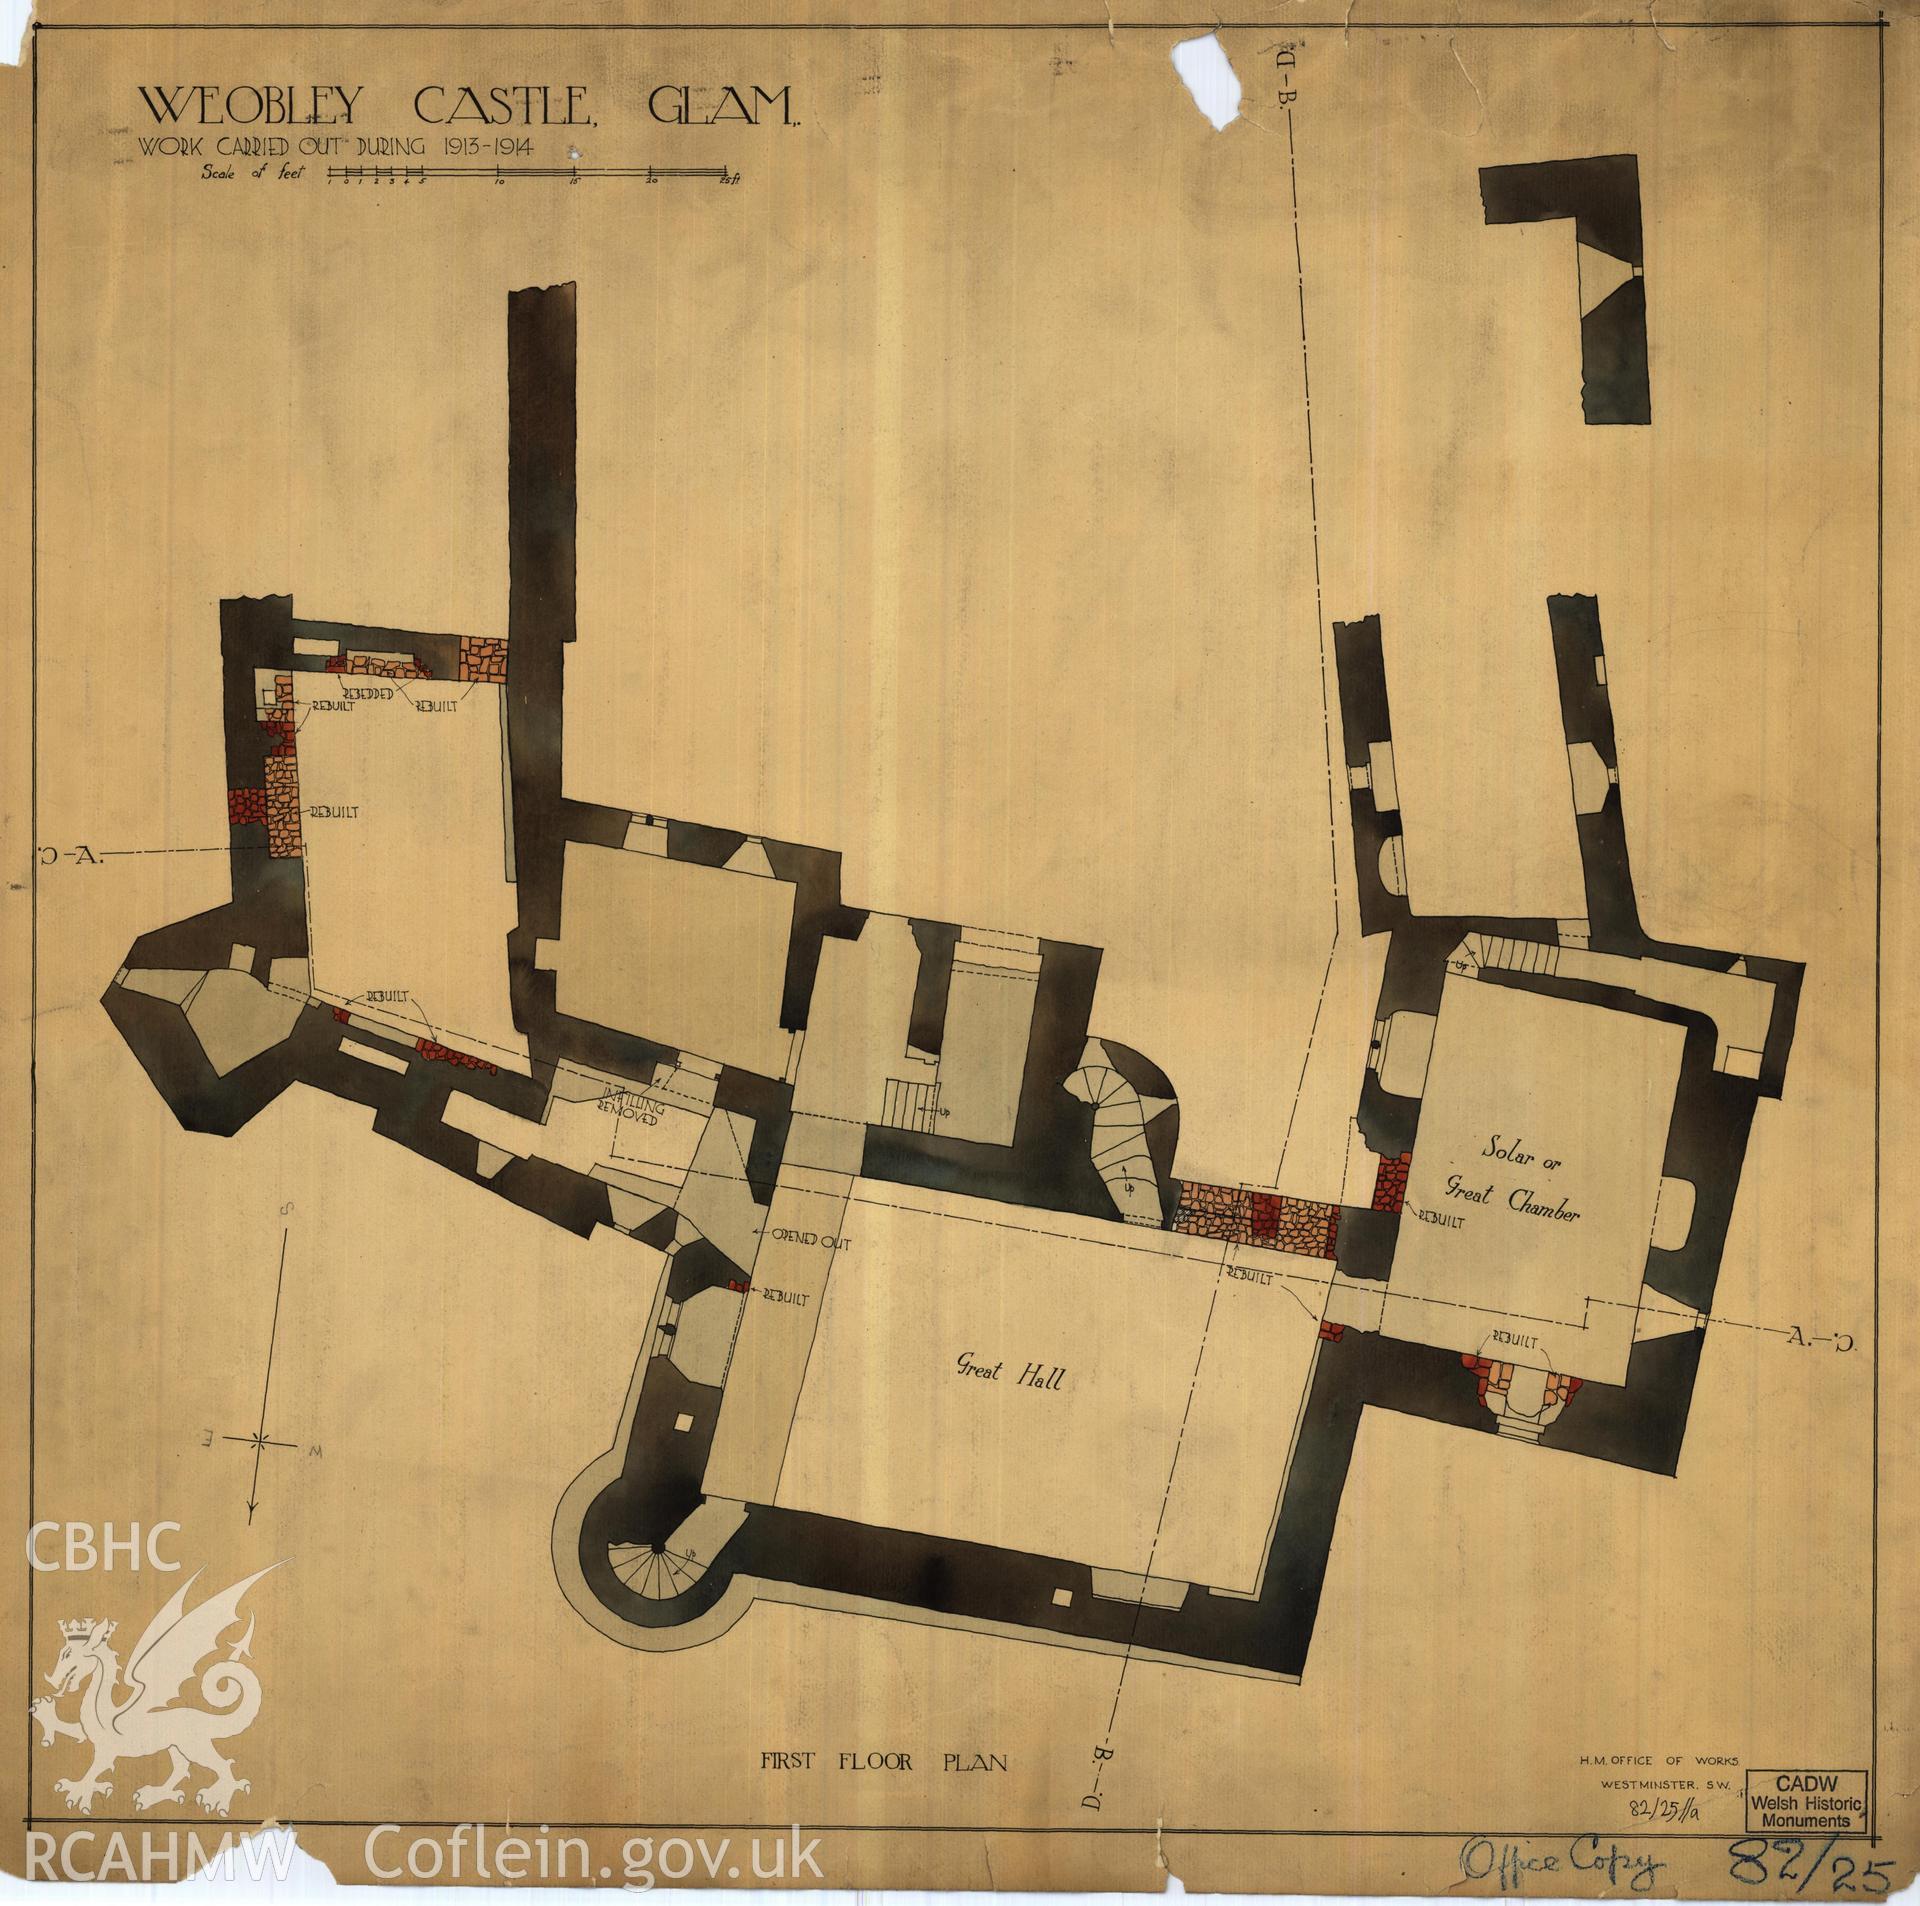 Cadw guardianship monument drawing of Weobley Castle. Upper floor plan + consolidations. Cadw Ref. No:82/25. Scale 1:48.